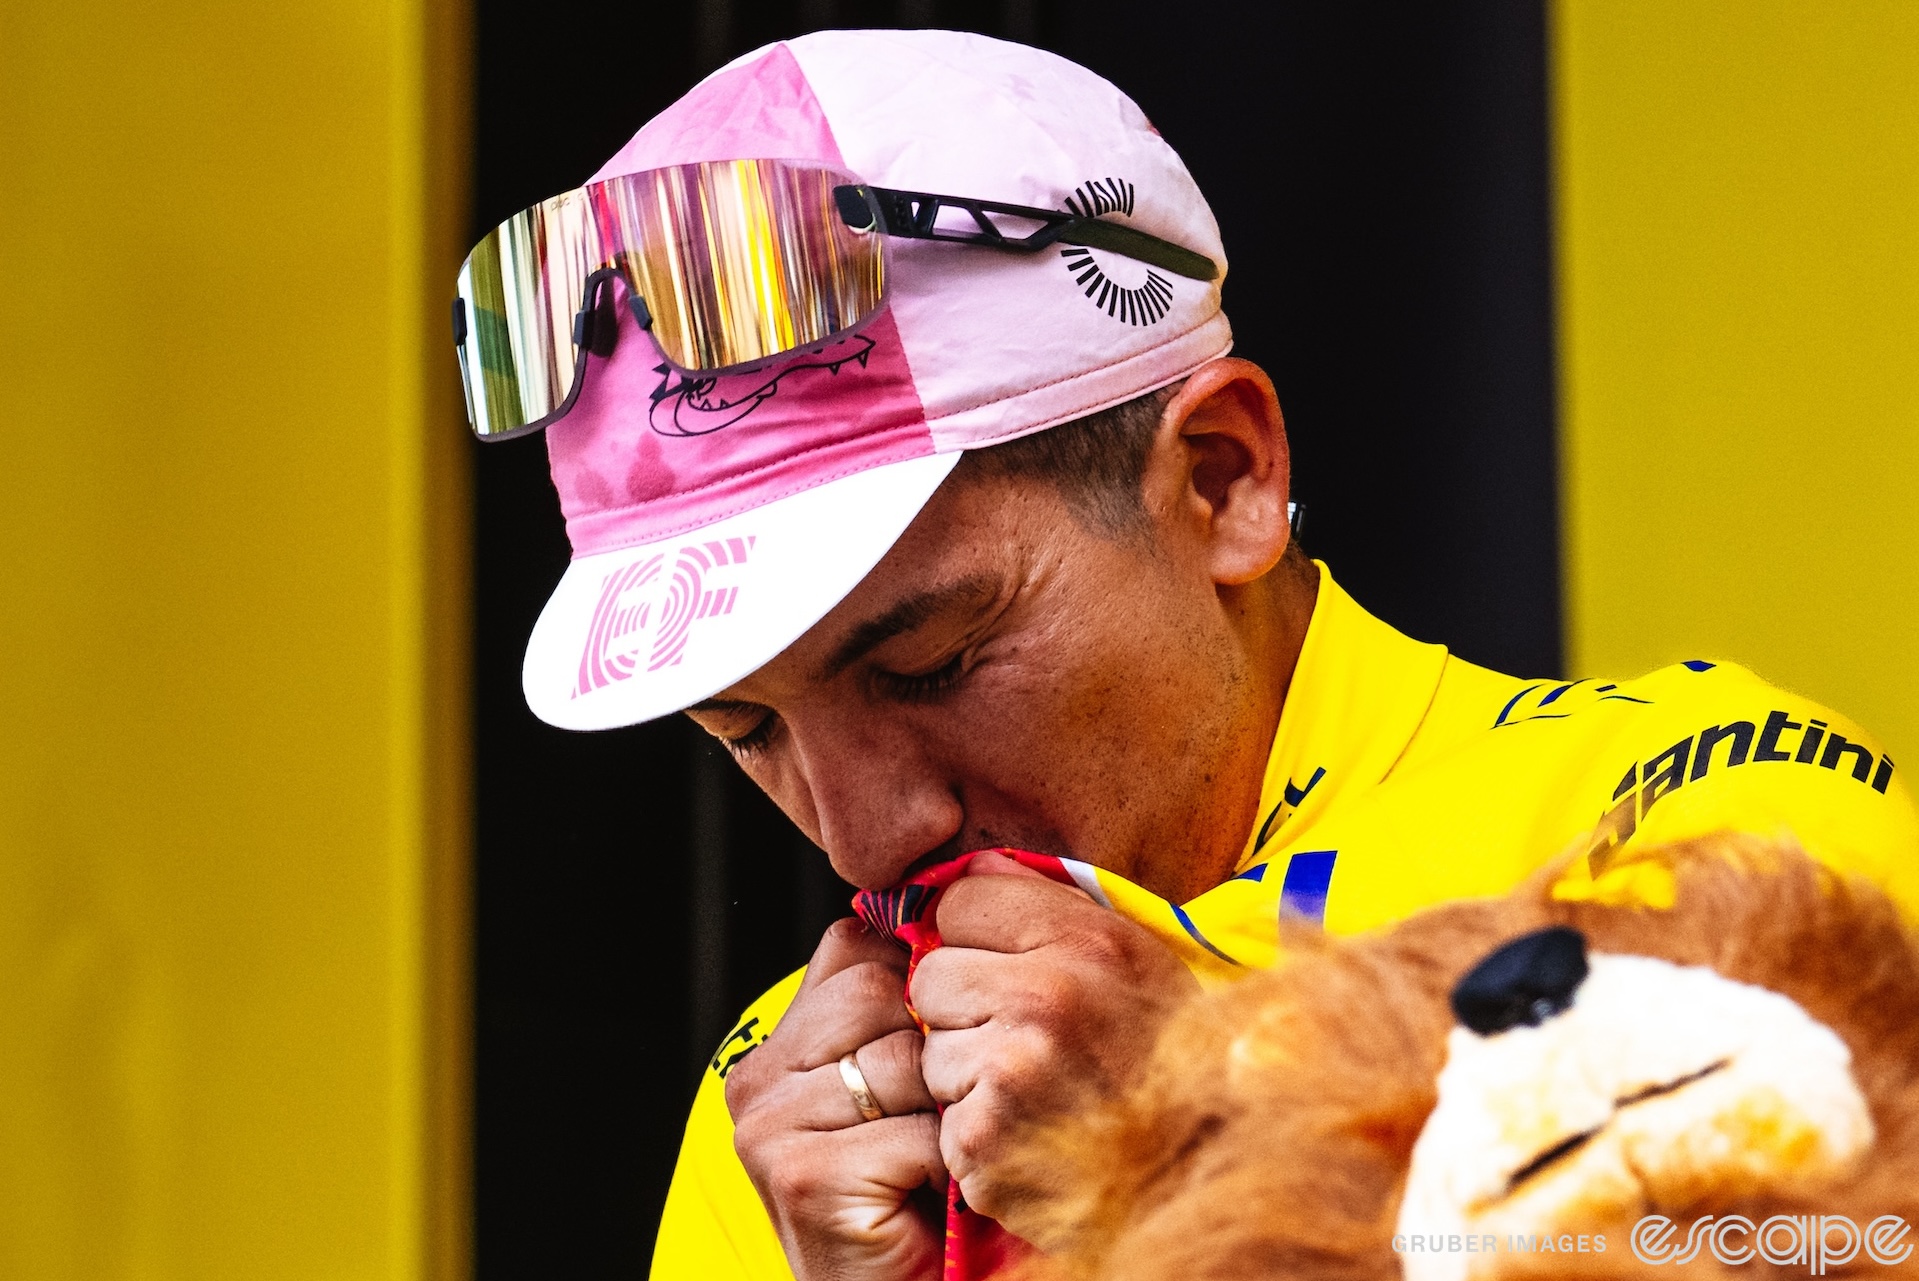 Richard Carapaz closes his eyes and kisses the yellow jersey he's wearing during the podium ceremony after stage 3 of the 2024 Tour de France.